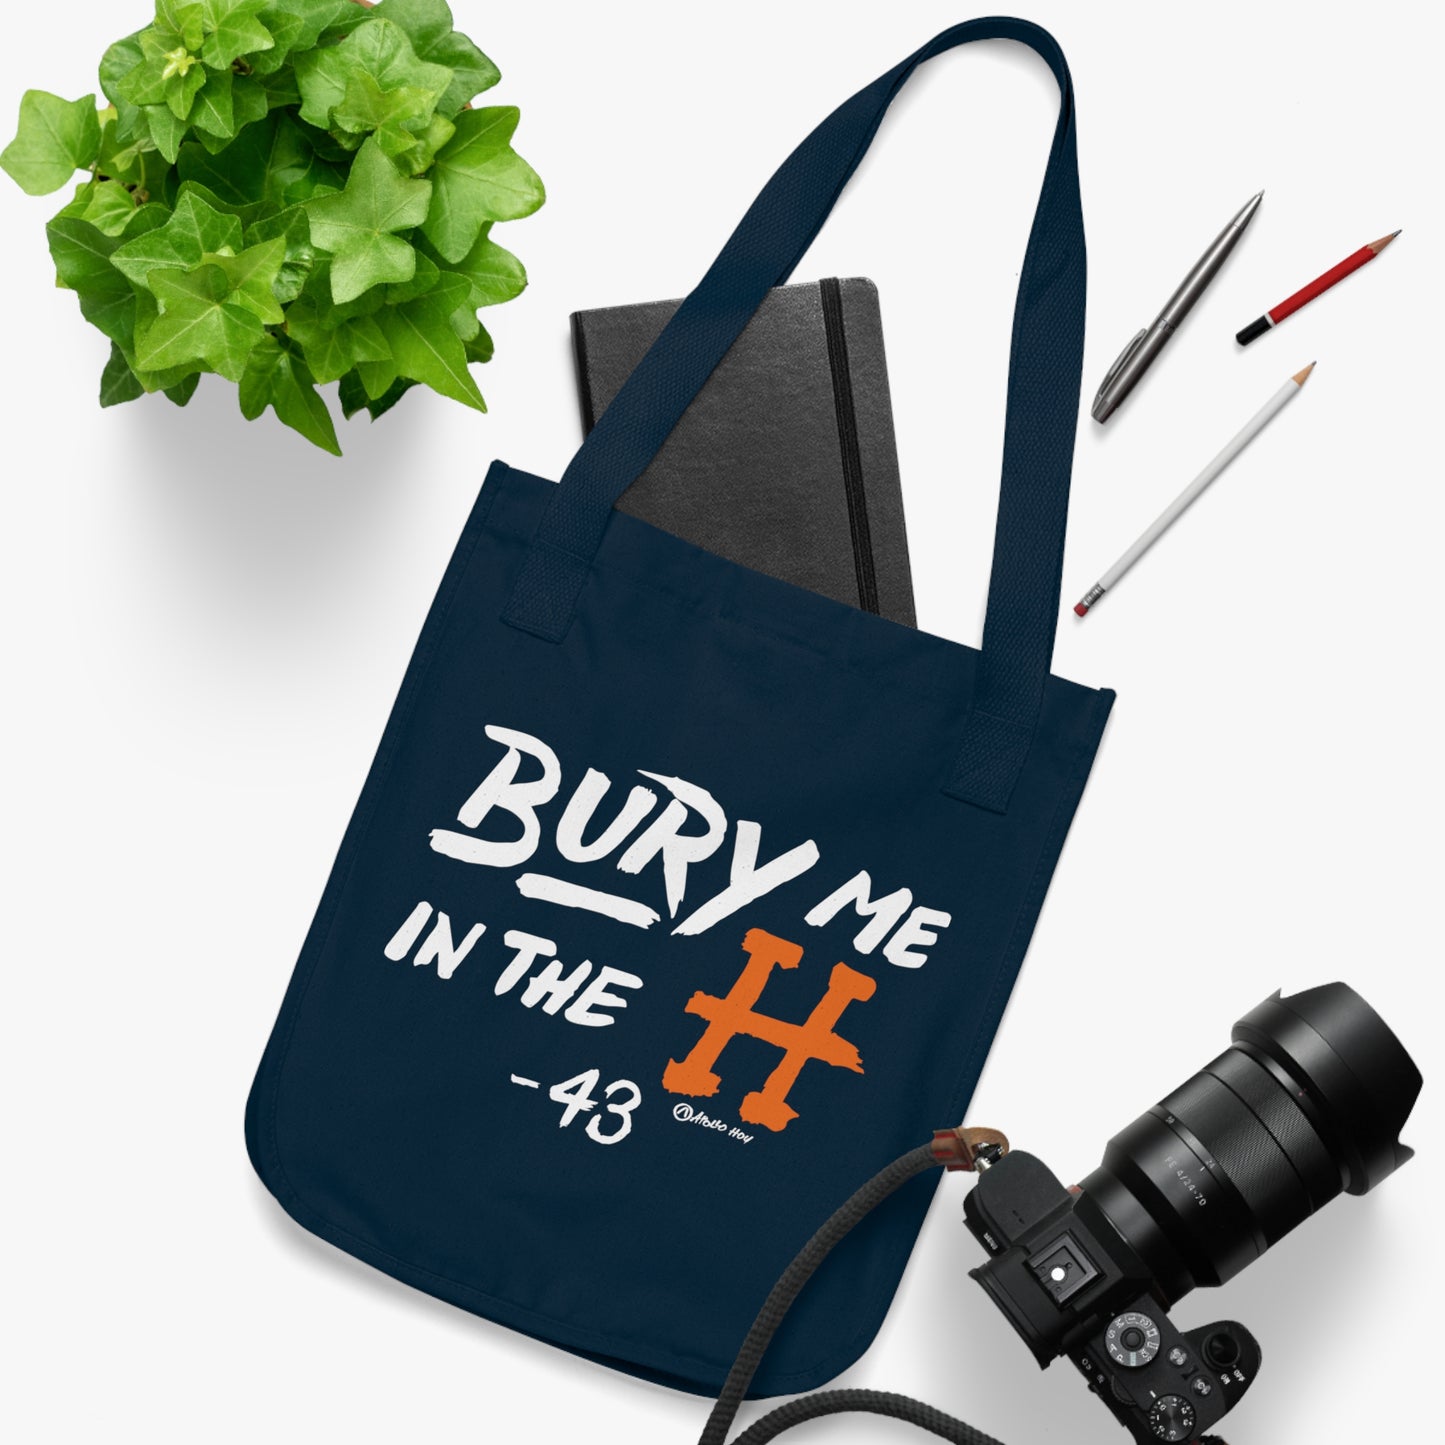 Bury Me In The H Canvas Tote Bag